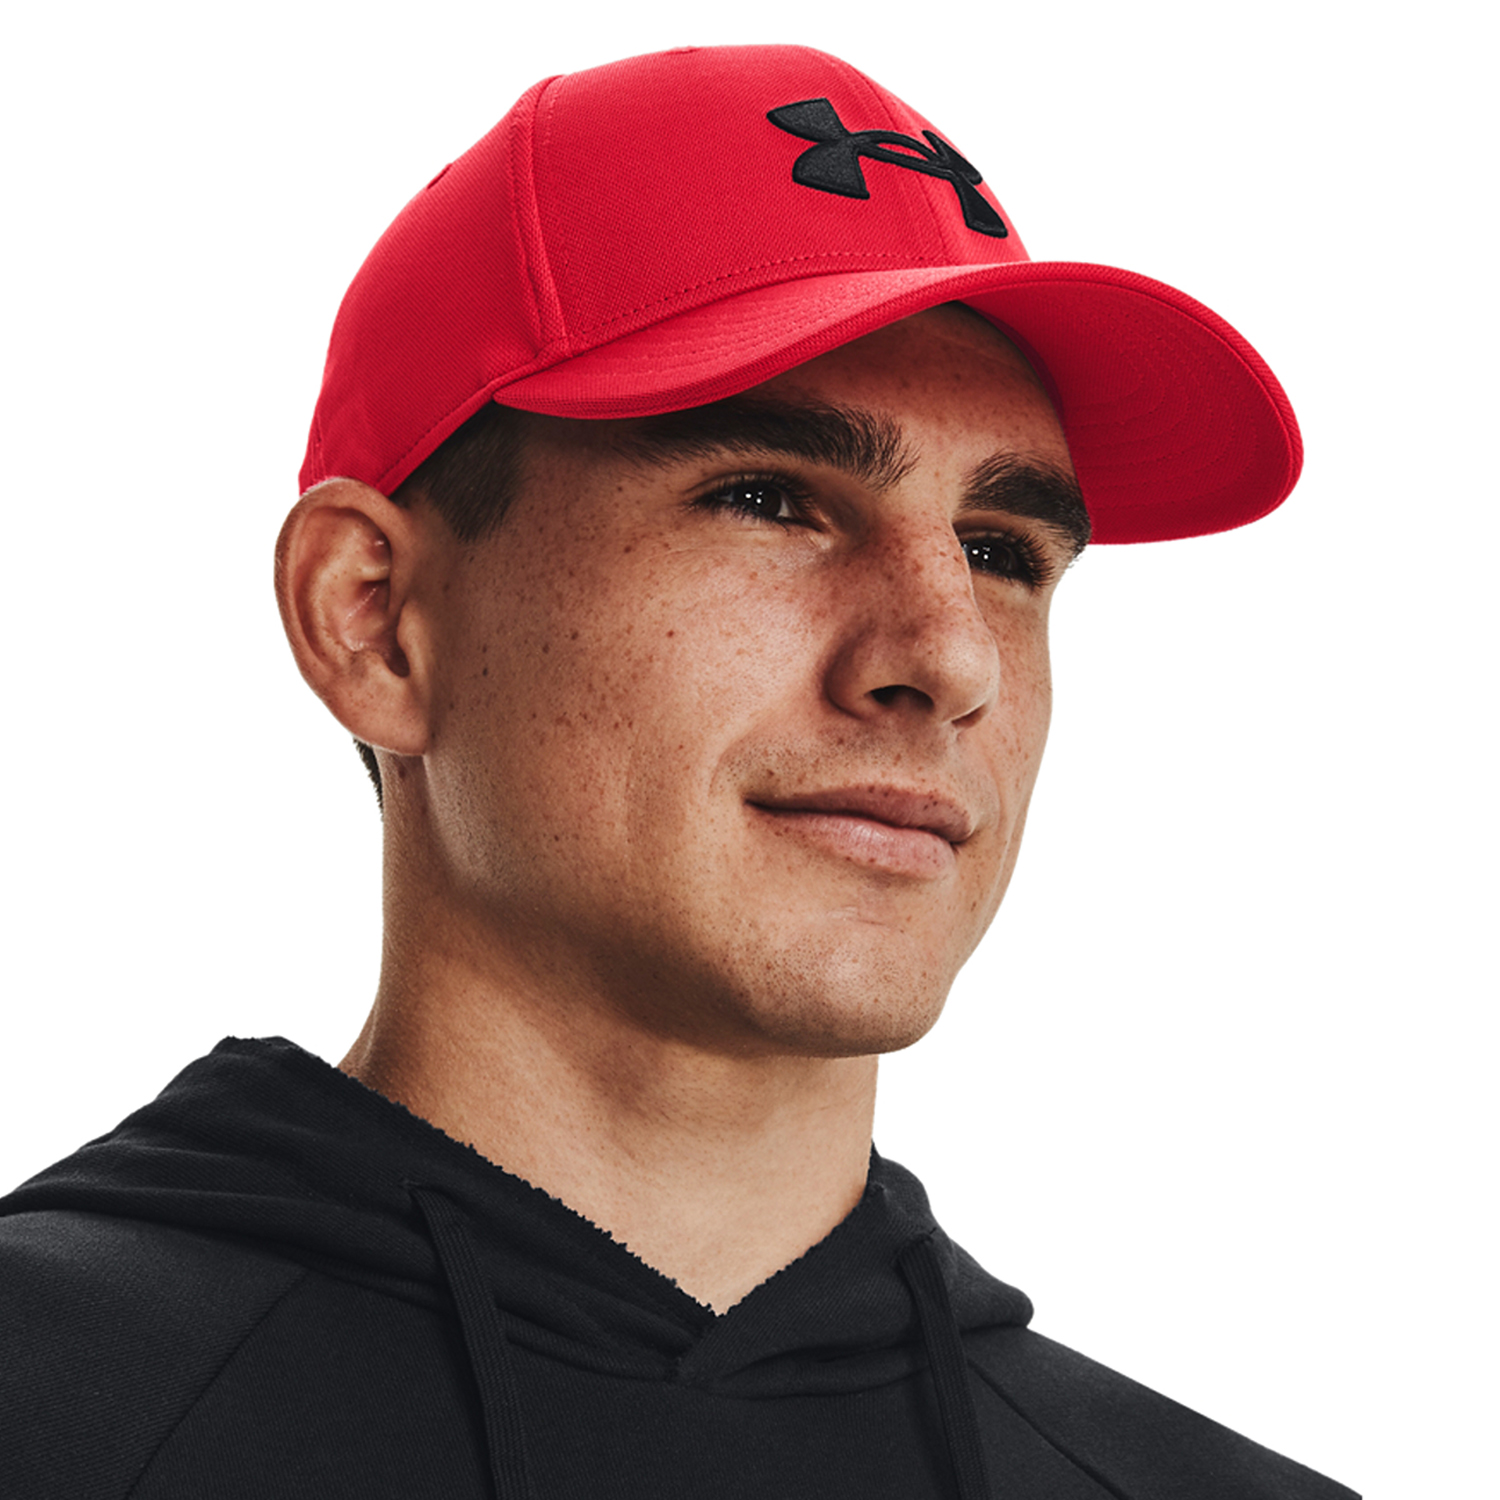 Under Armour Blitzing Cappello - Red/Black